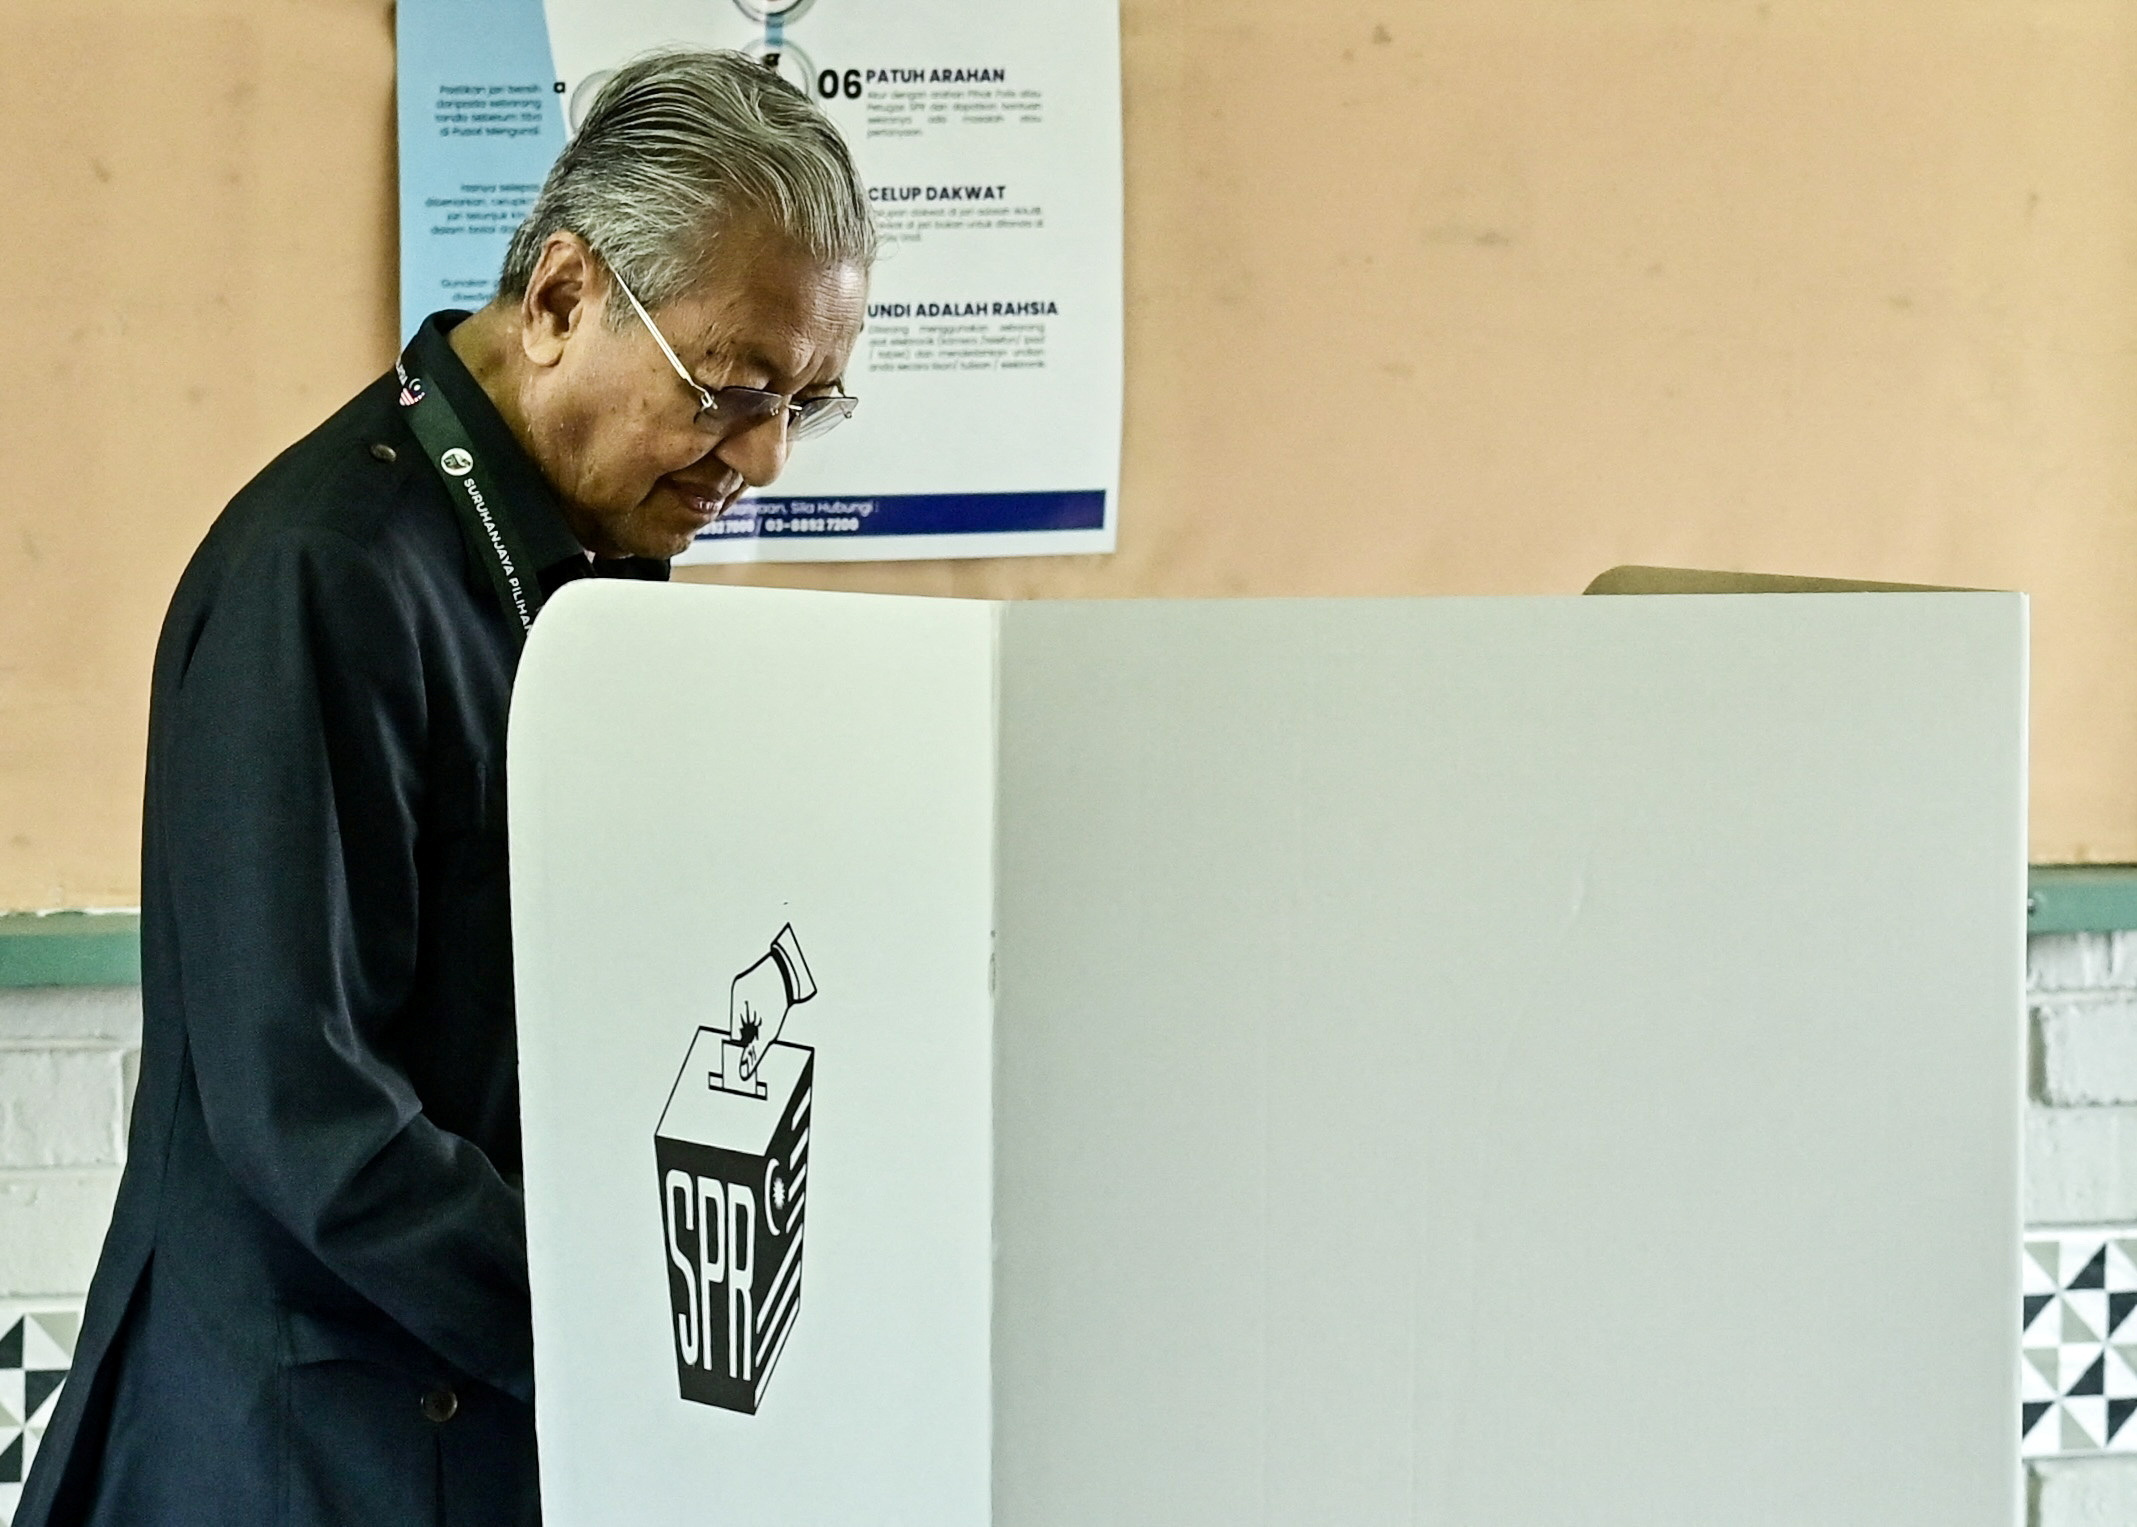 Former Malaysia Prime Minister and Gerakan Tanah Air chairman Mahathir Mohamad votes in Alor Setar